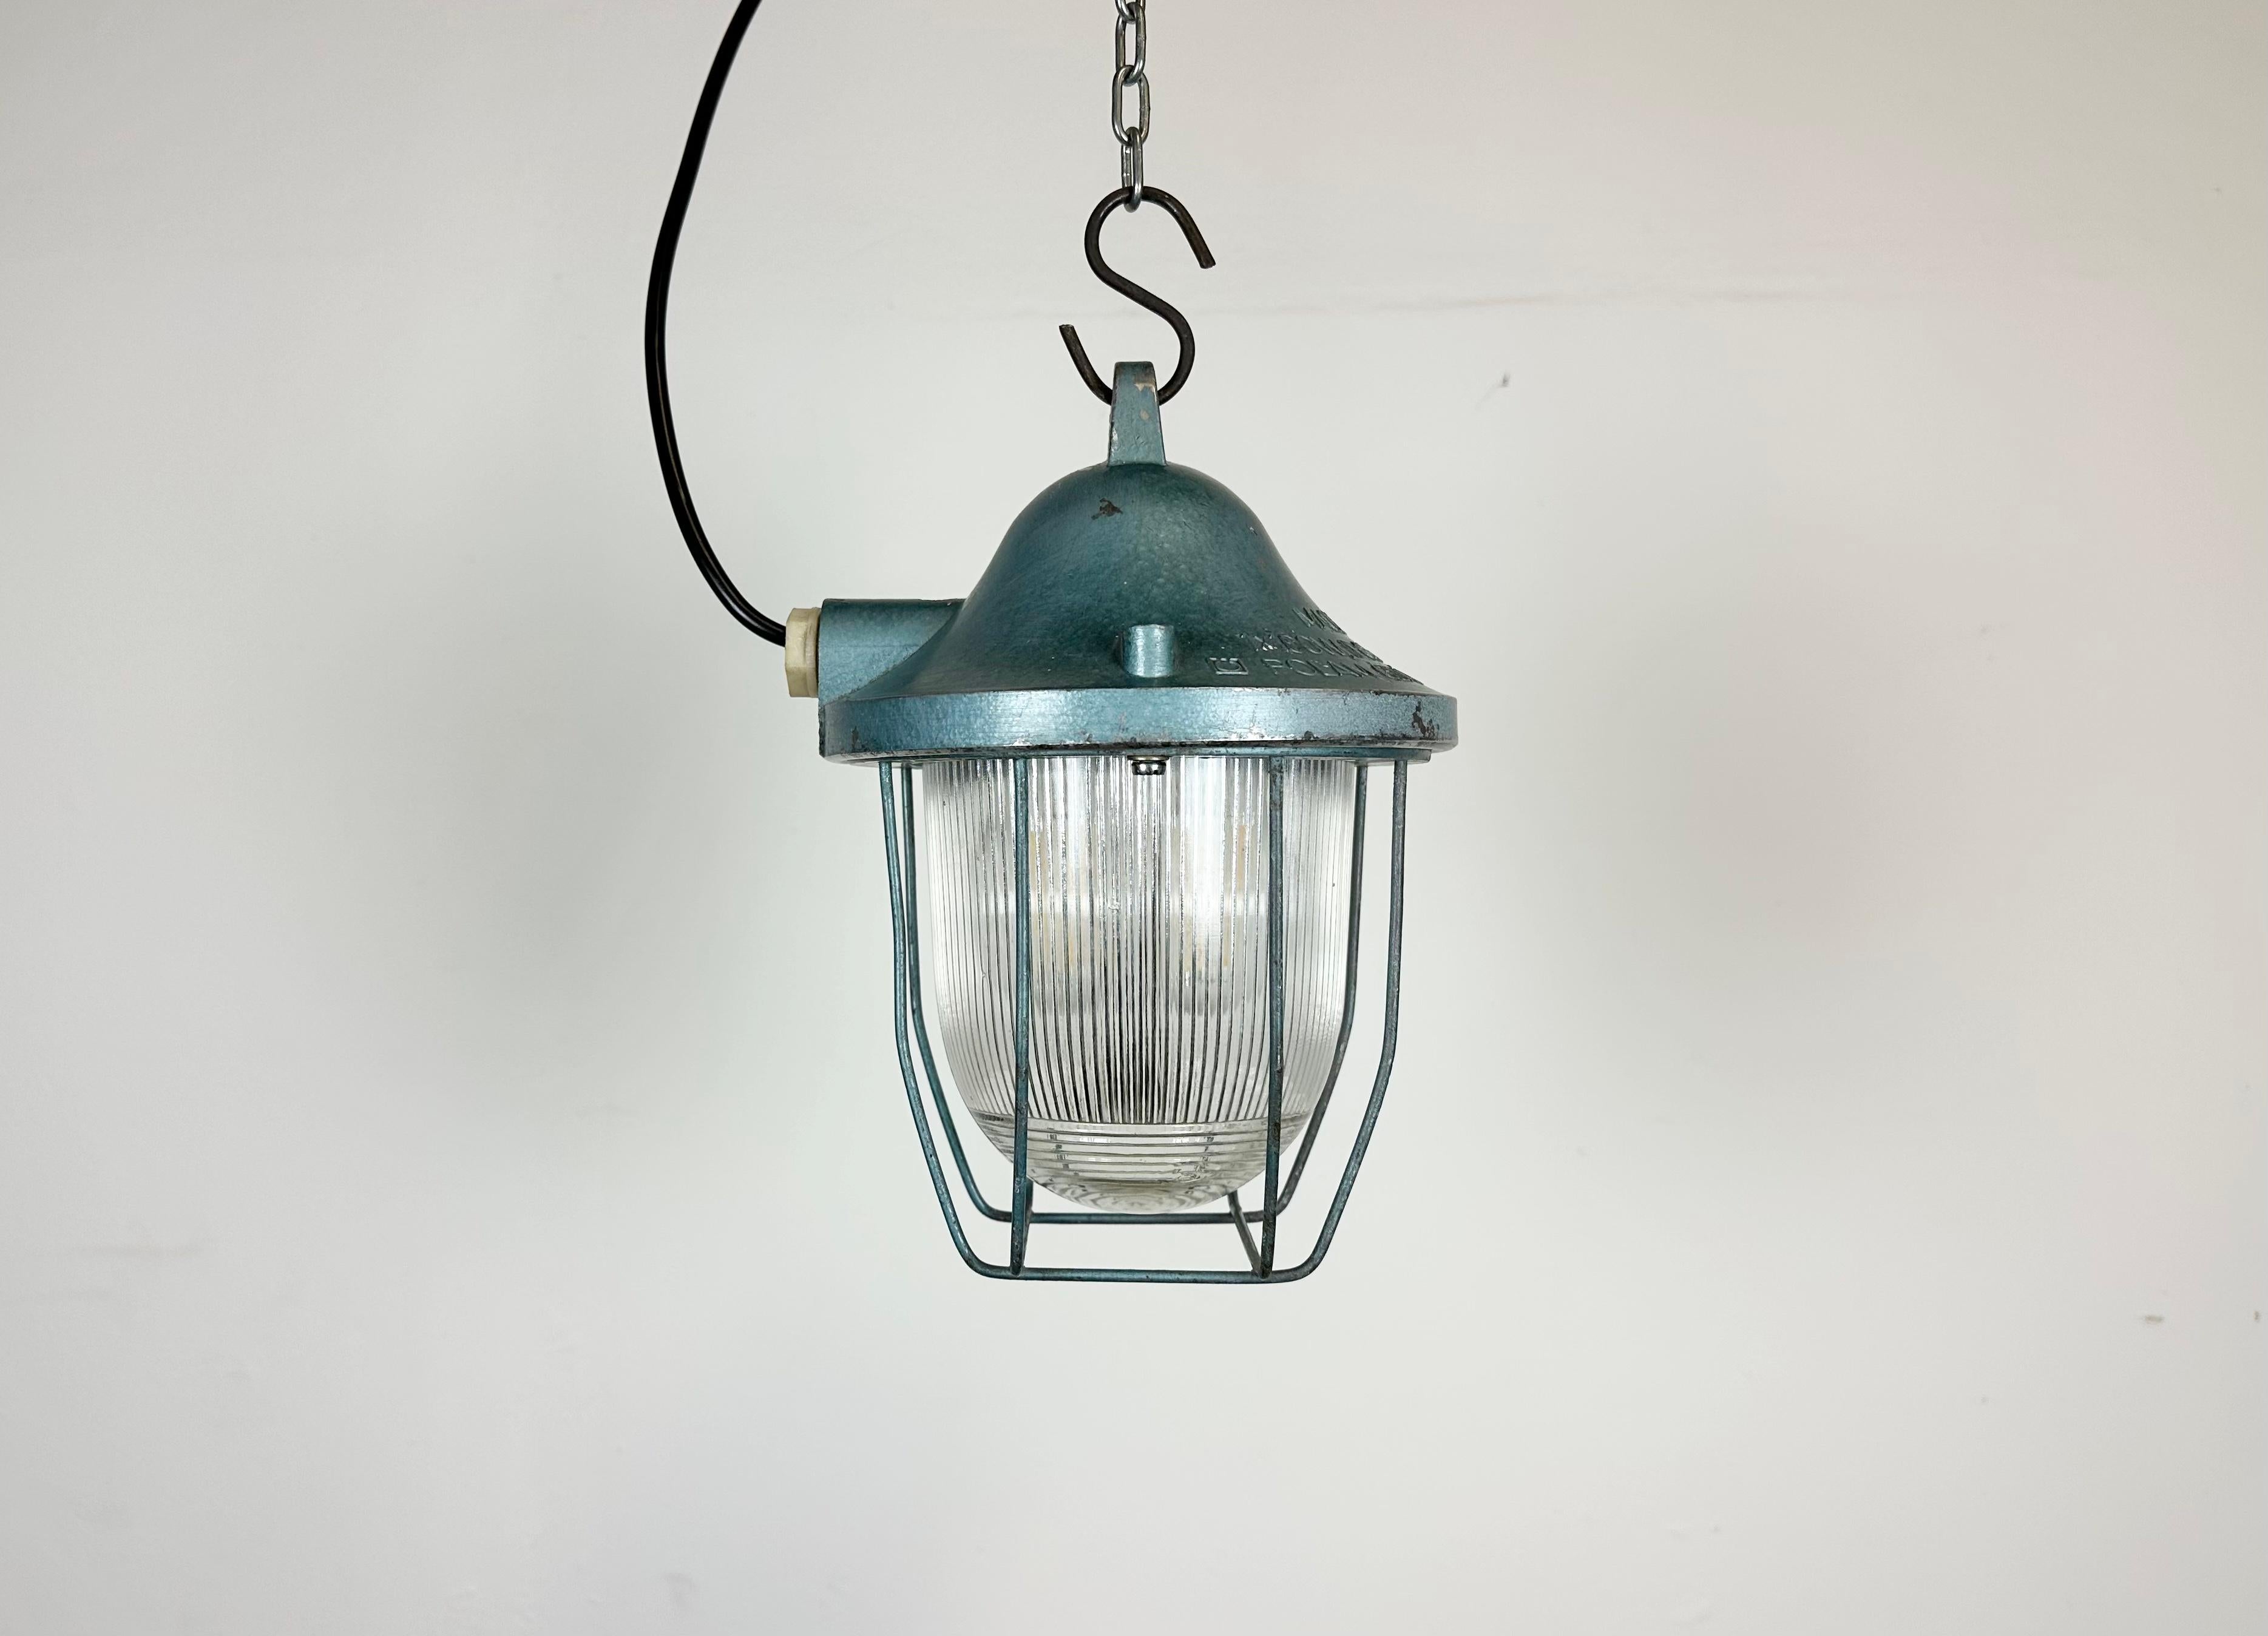 Blue industrial lamp made by Polam Gdansk in Poland during the 1960s. It features a cast aluminium body, an iron cage and striped glass. The porcelain socket requires E 27/ E 26 lightbulbs. New wire. The weight of the lamp is 1,6 kg.